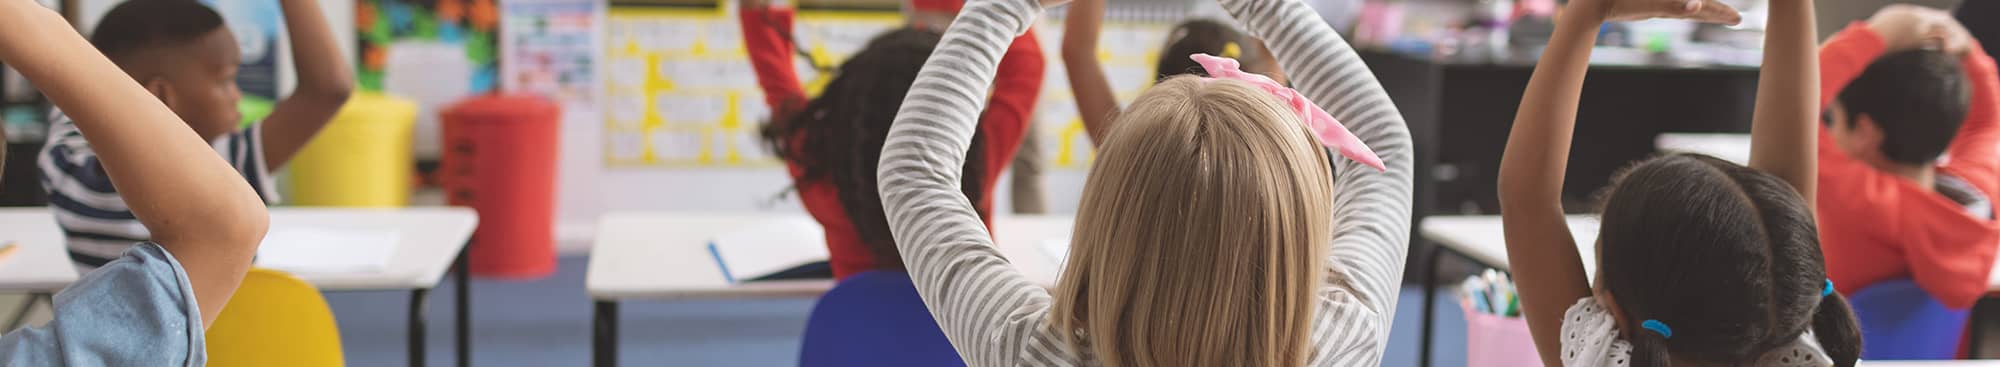 Students Stretching Arms to the Sky in a Classroom